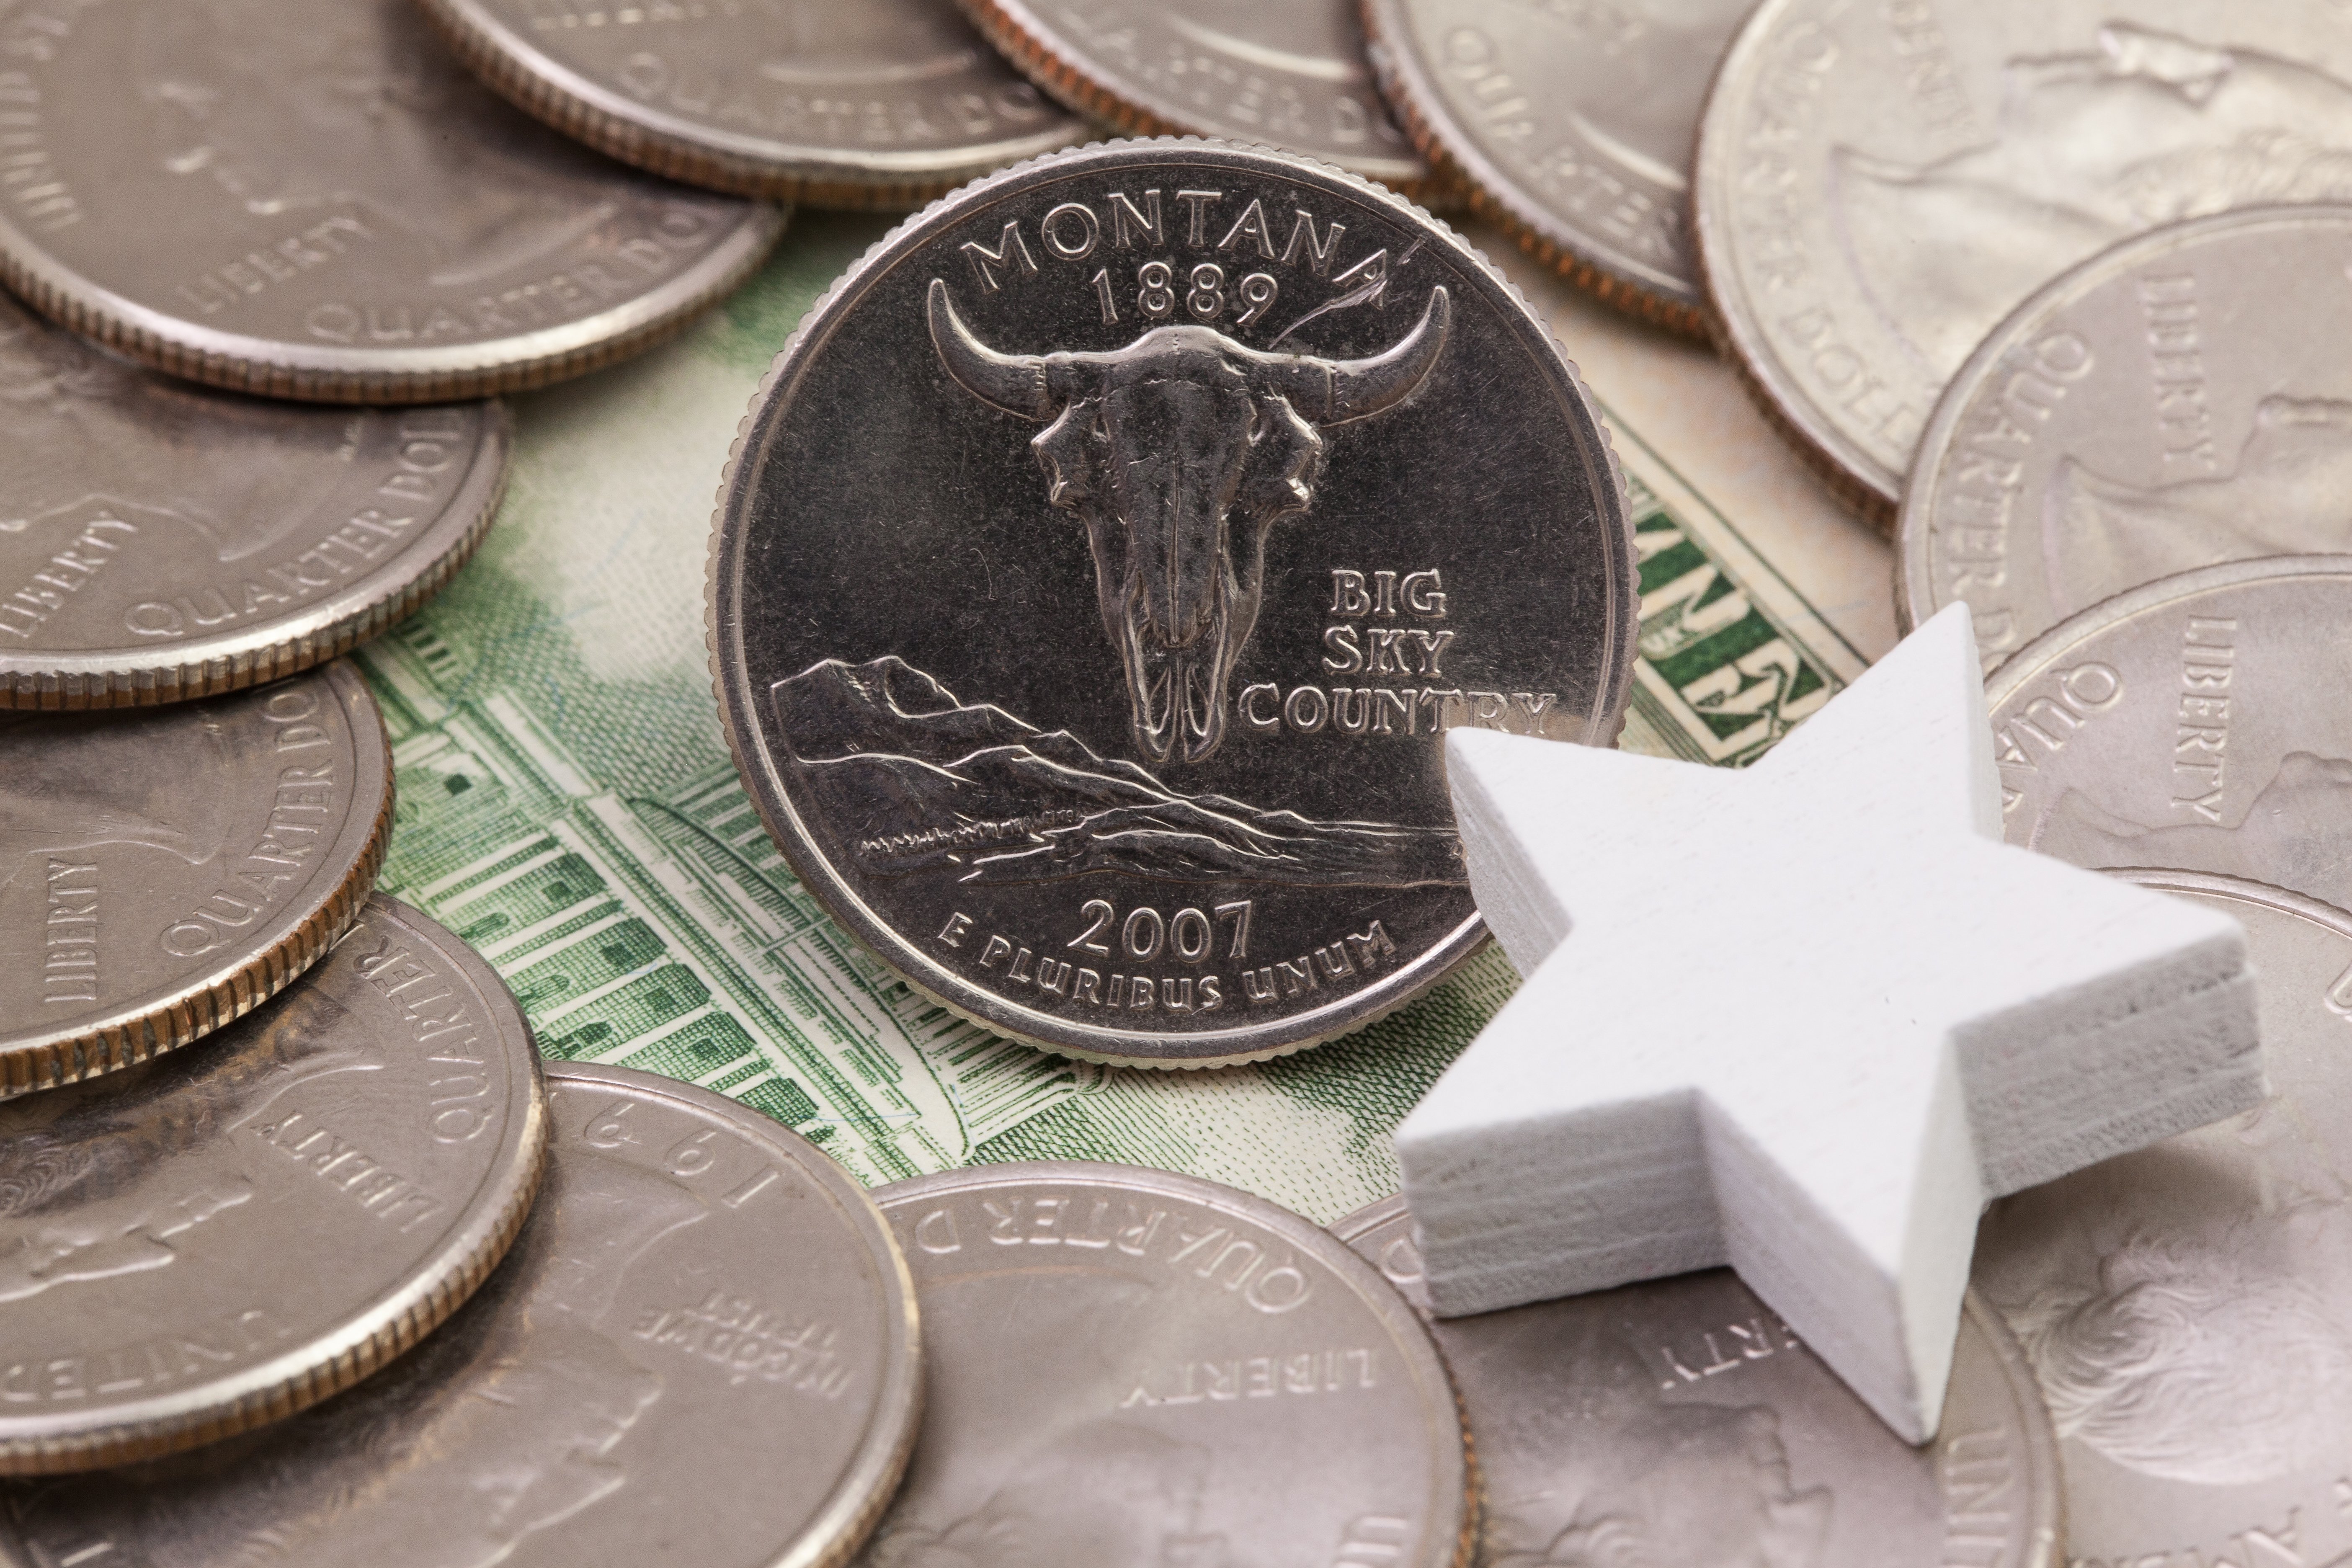 Montana state quarter which features a bison skull surrounded by other quarters and a white star decoration